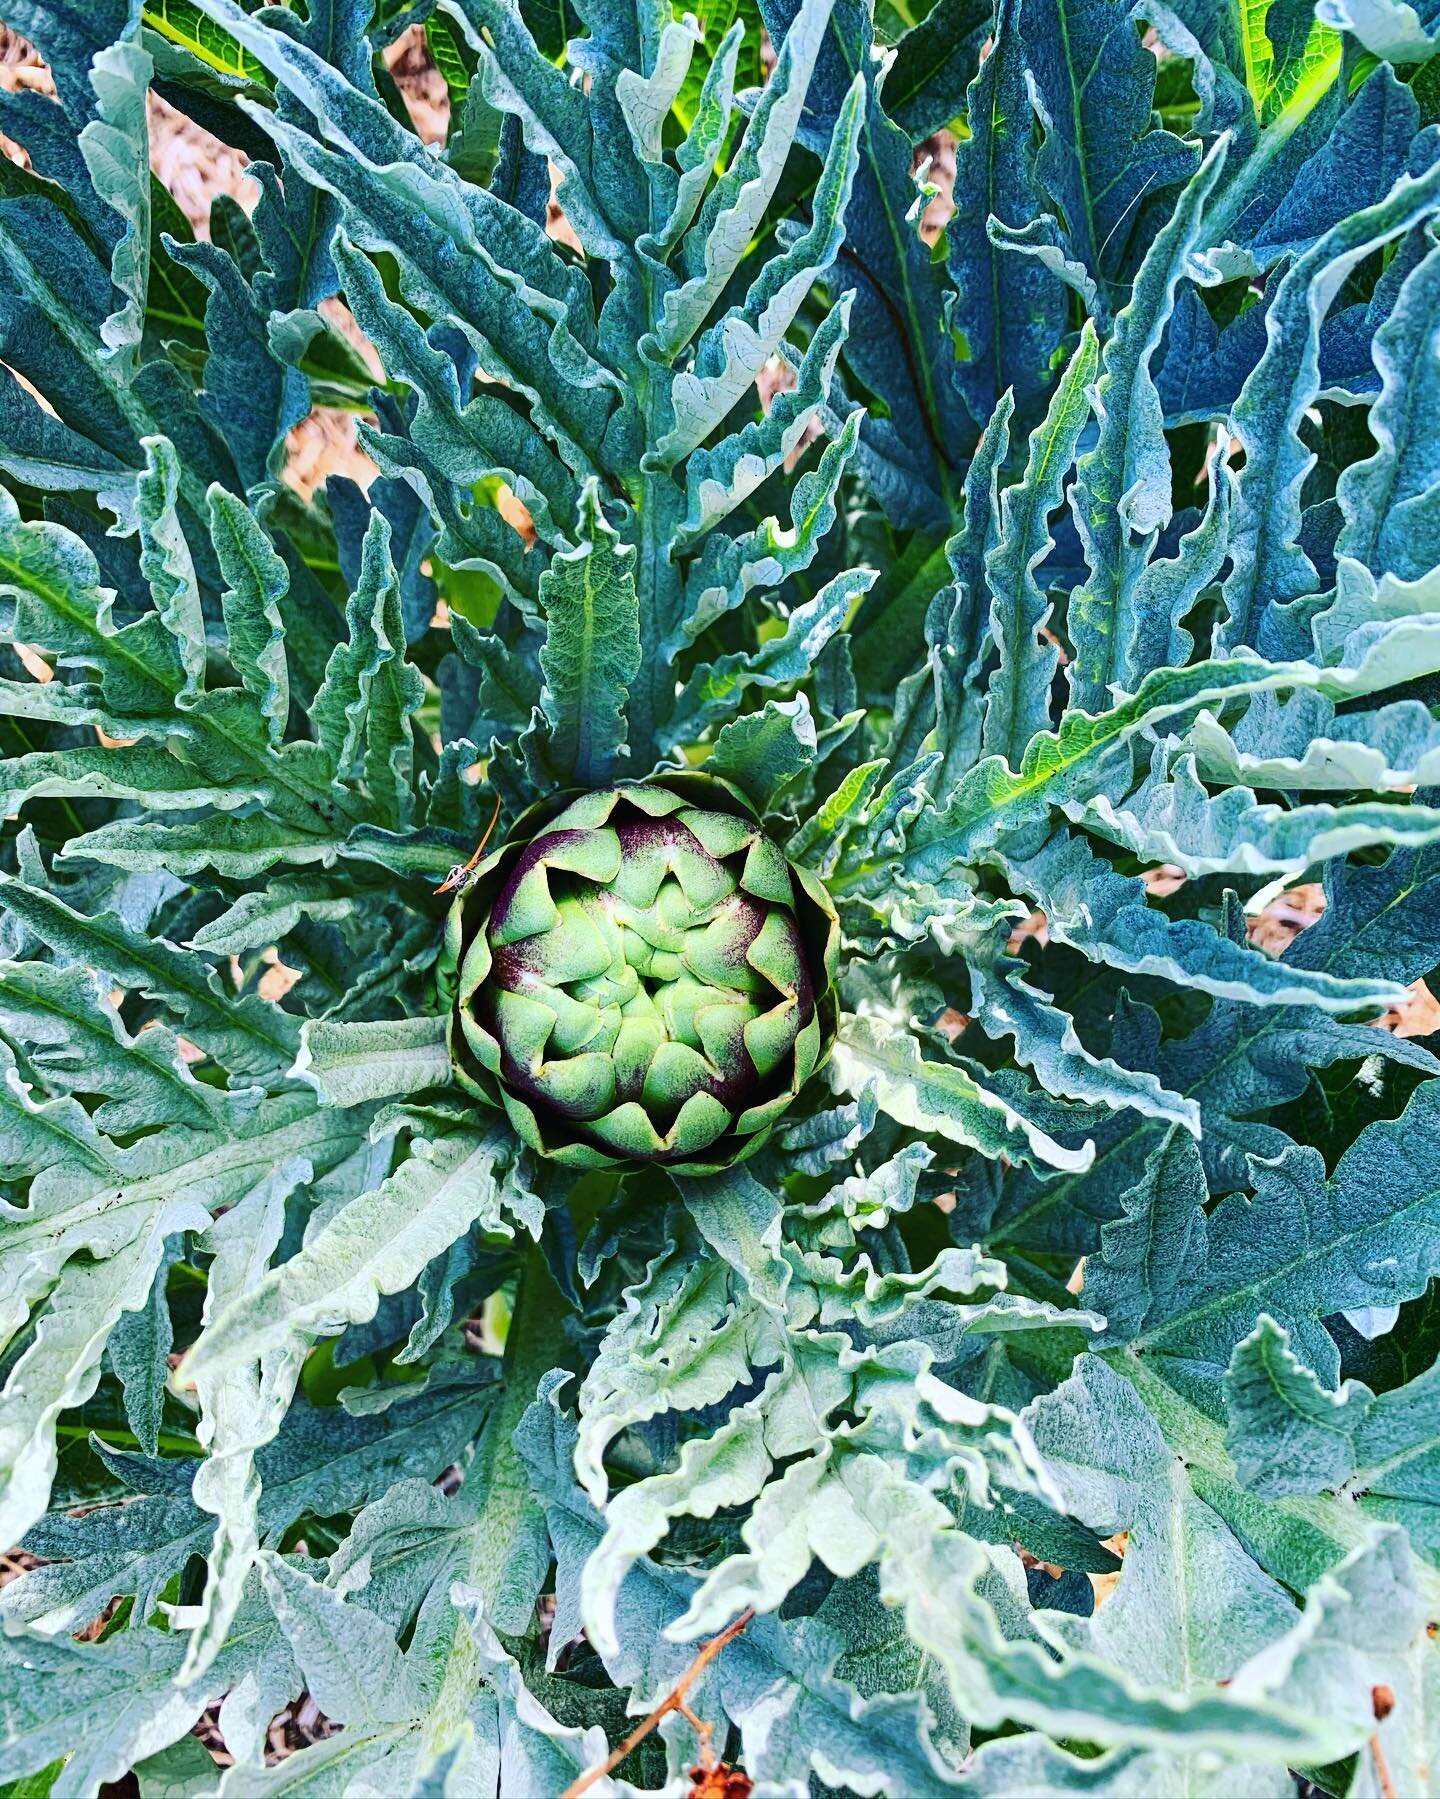 First of this years artichokes just poking through. I love growing these plants  they are so sculptural in the garden with the greyish foliage...and there also damn tasty🍽🍽
,
.
.
#chefsgarden #artichoke #organicgardening #gardeningaustralia #vegeta